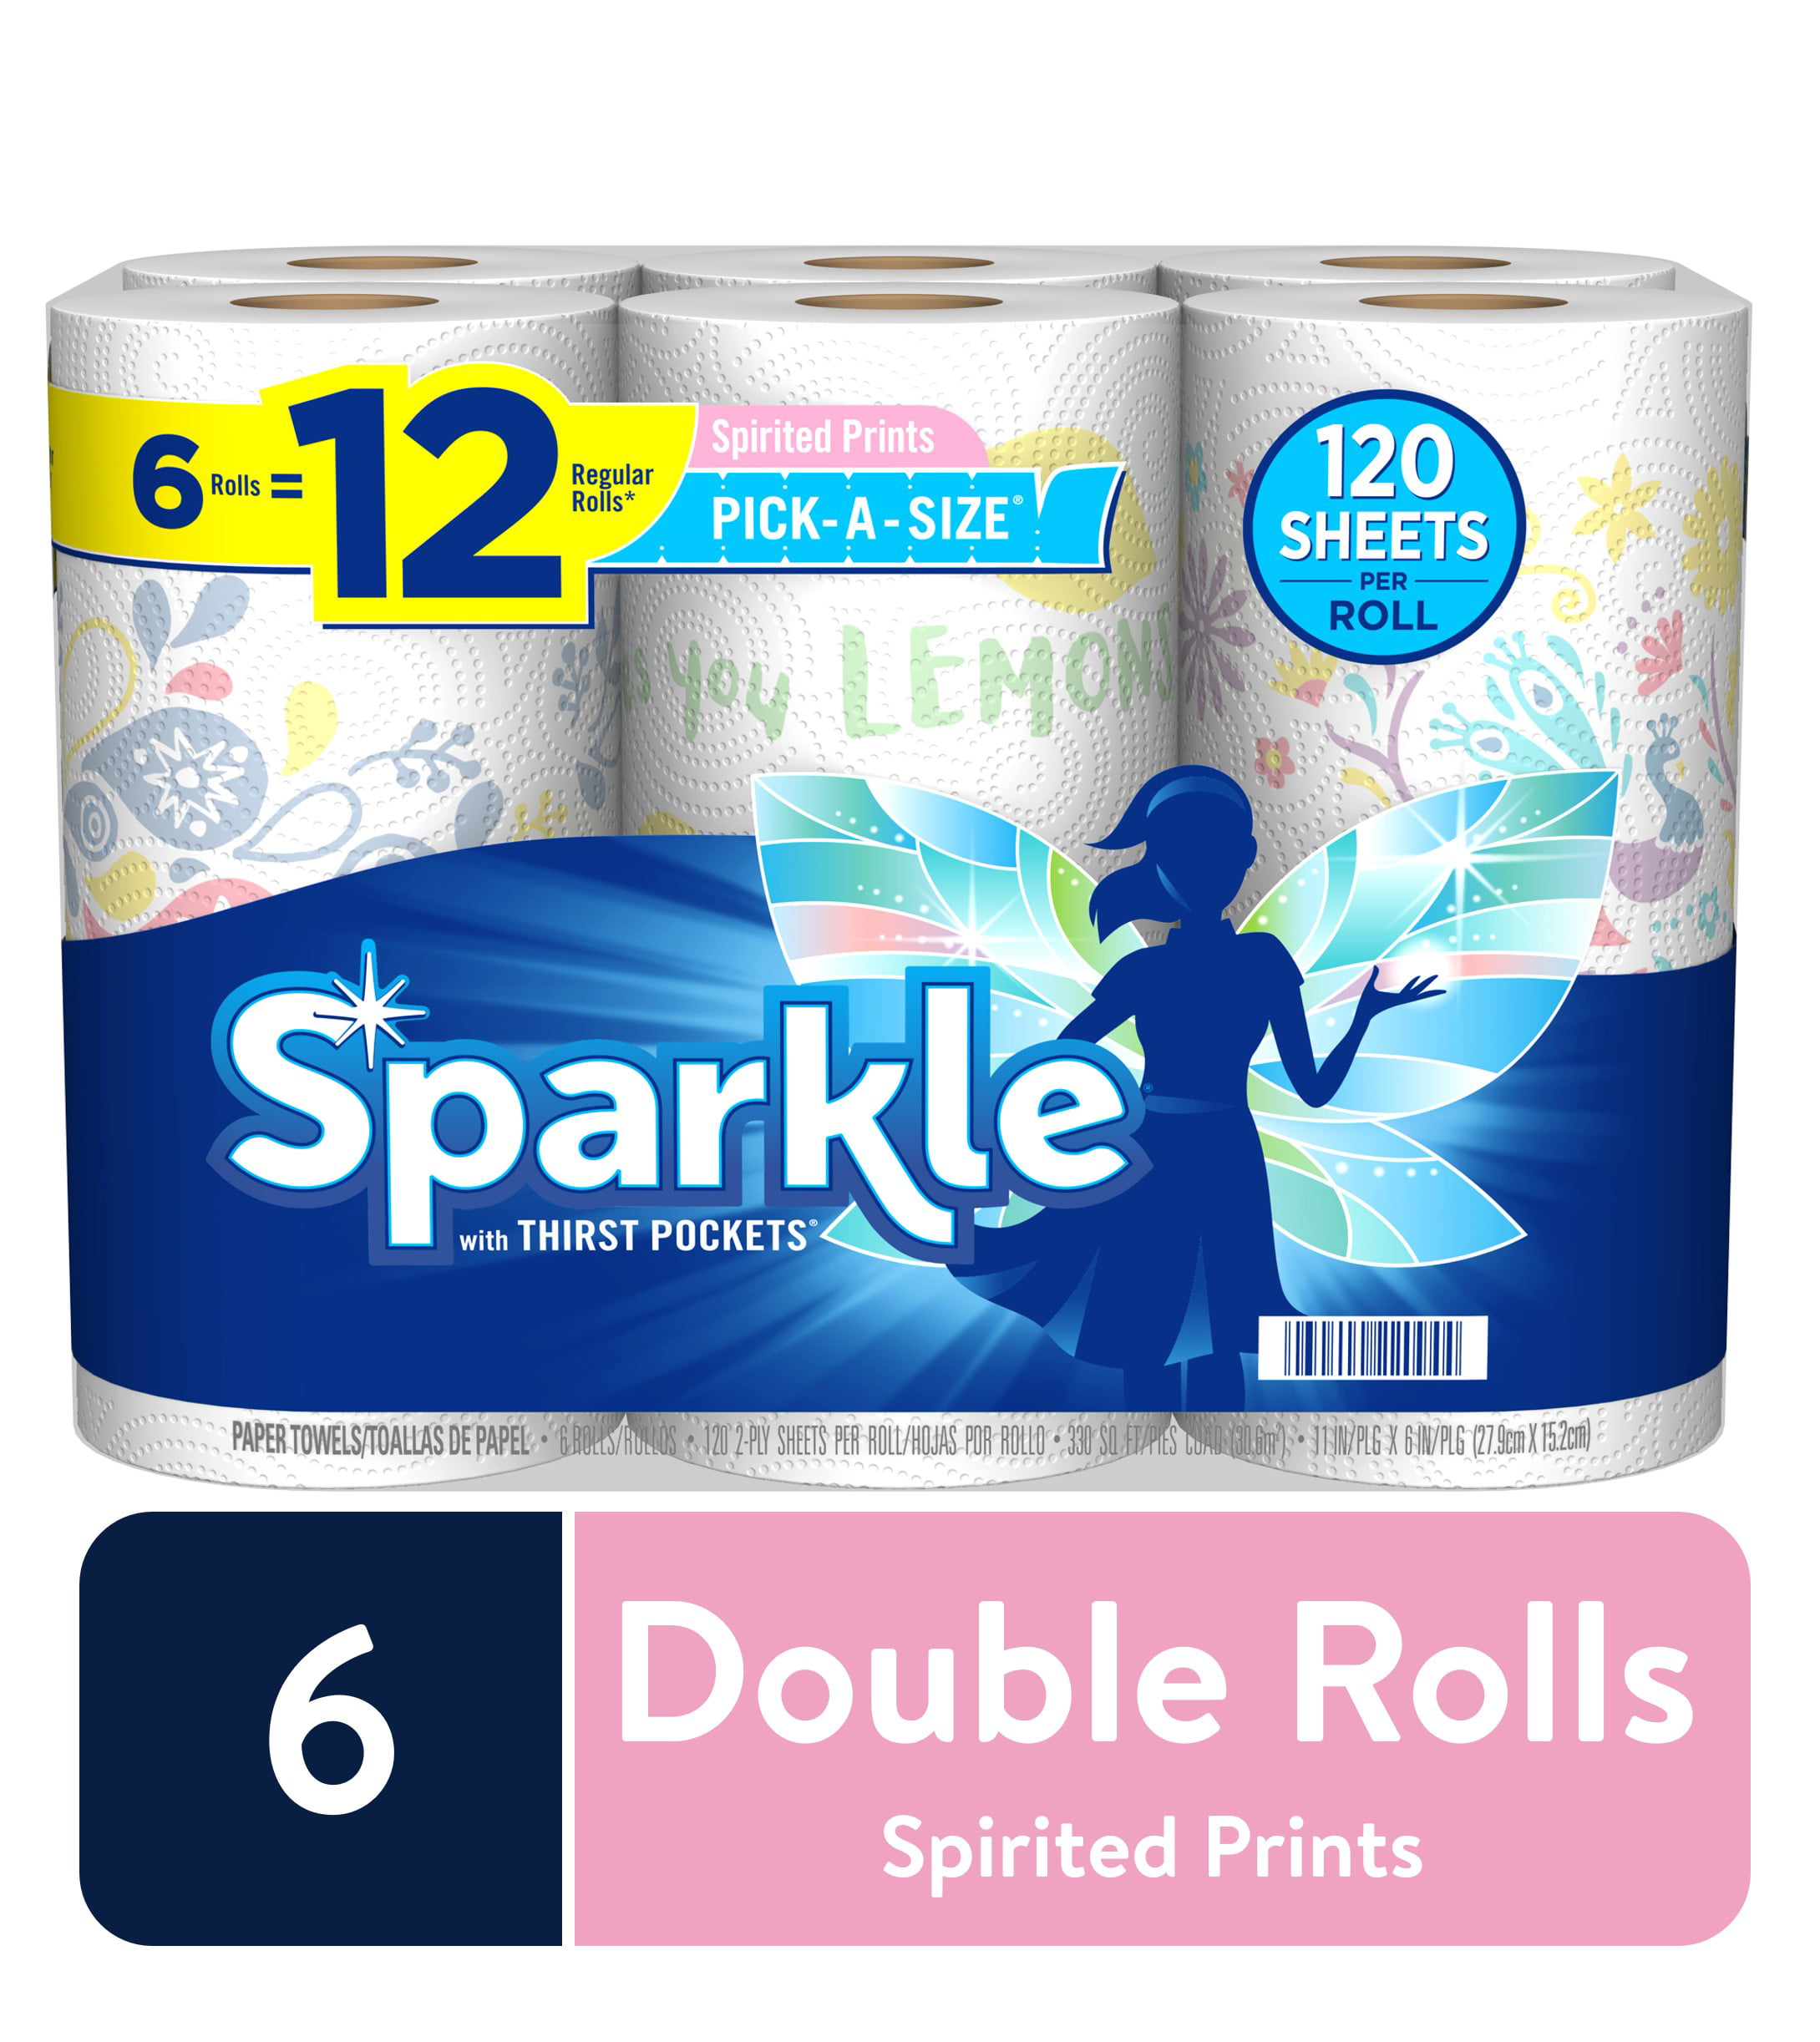 Sparkle paper towels with Thirst Pockets are specifically-designed to be st...